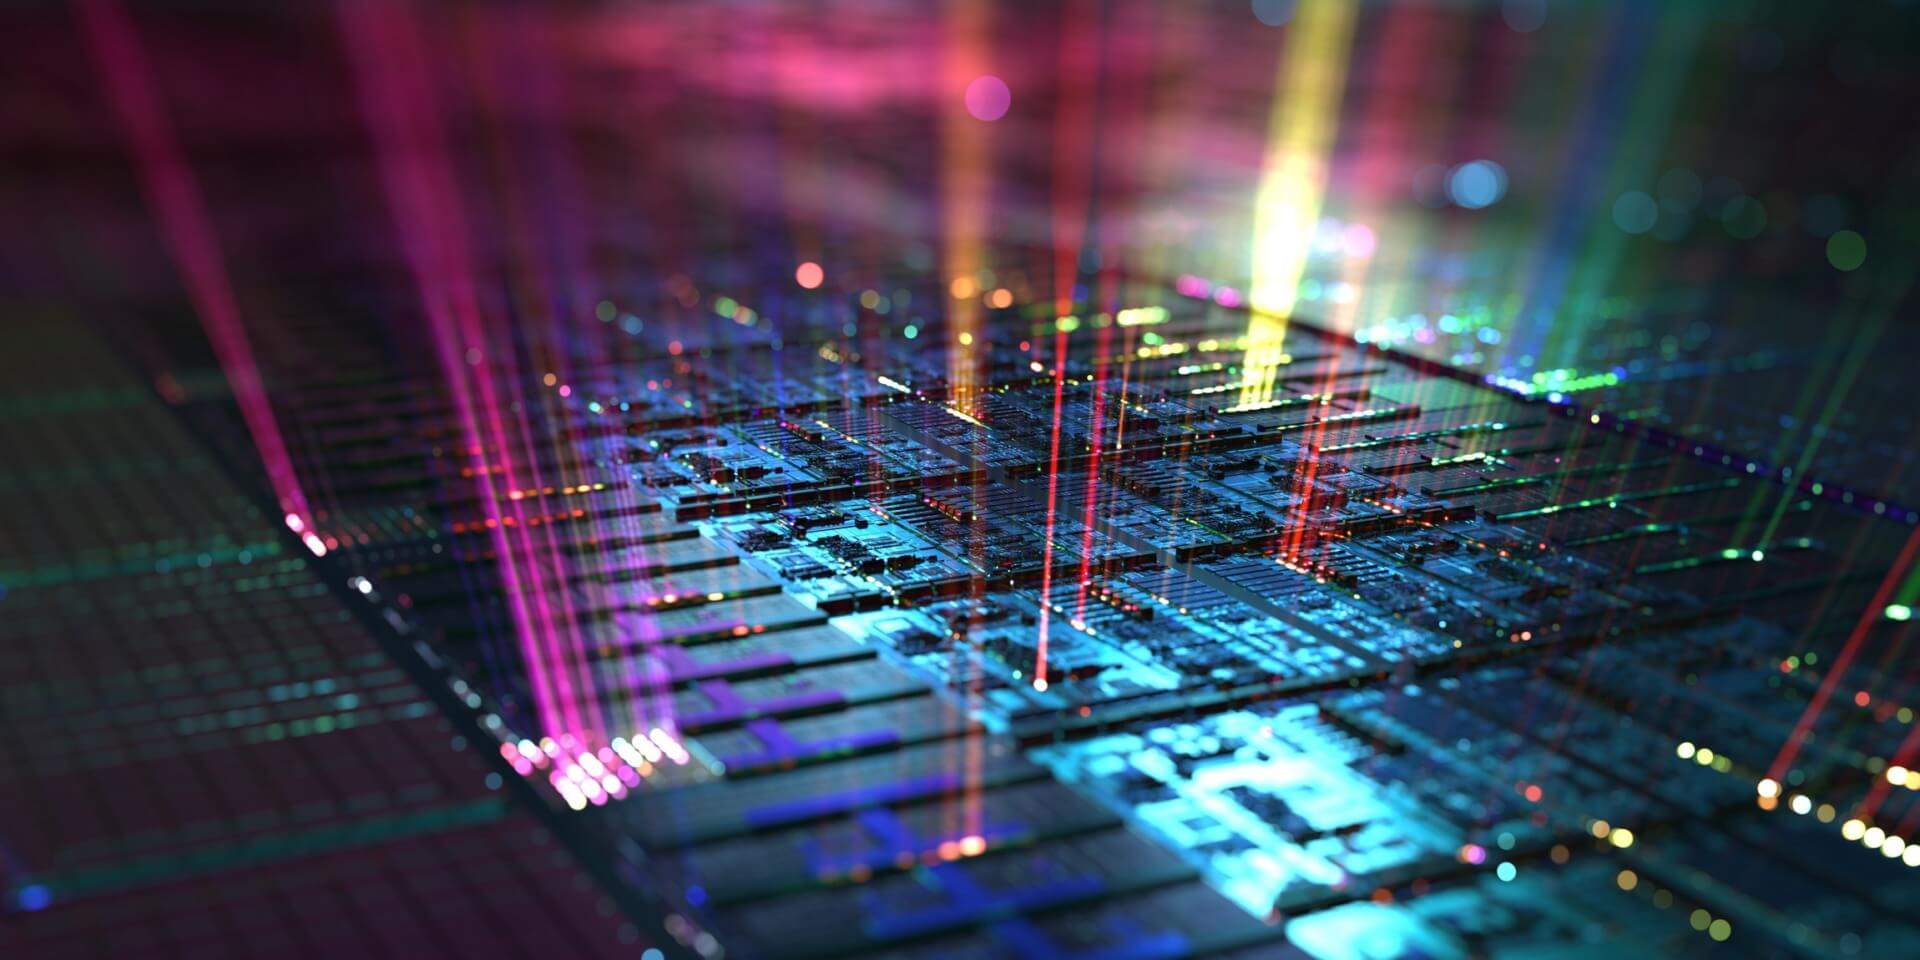 An iStock image of a futuristic-looking computer chip.